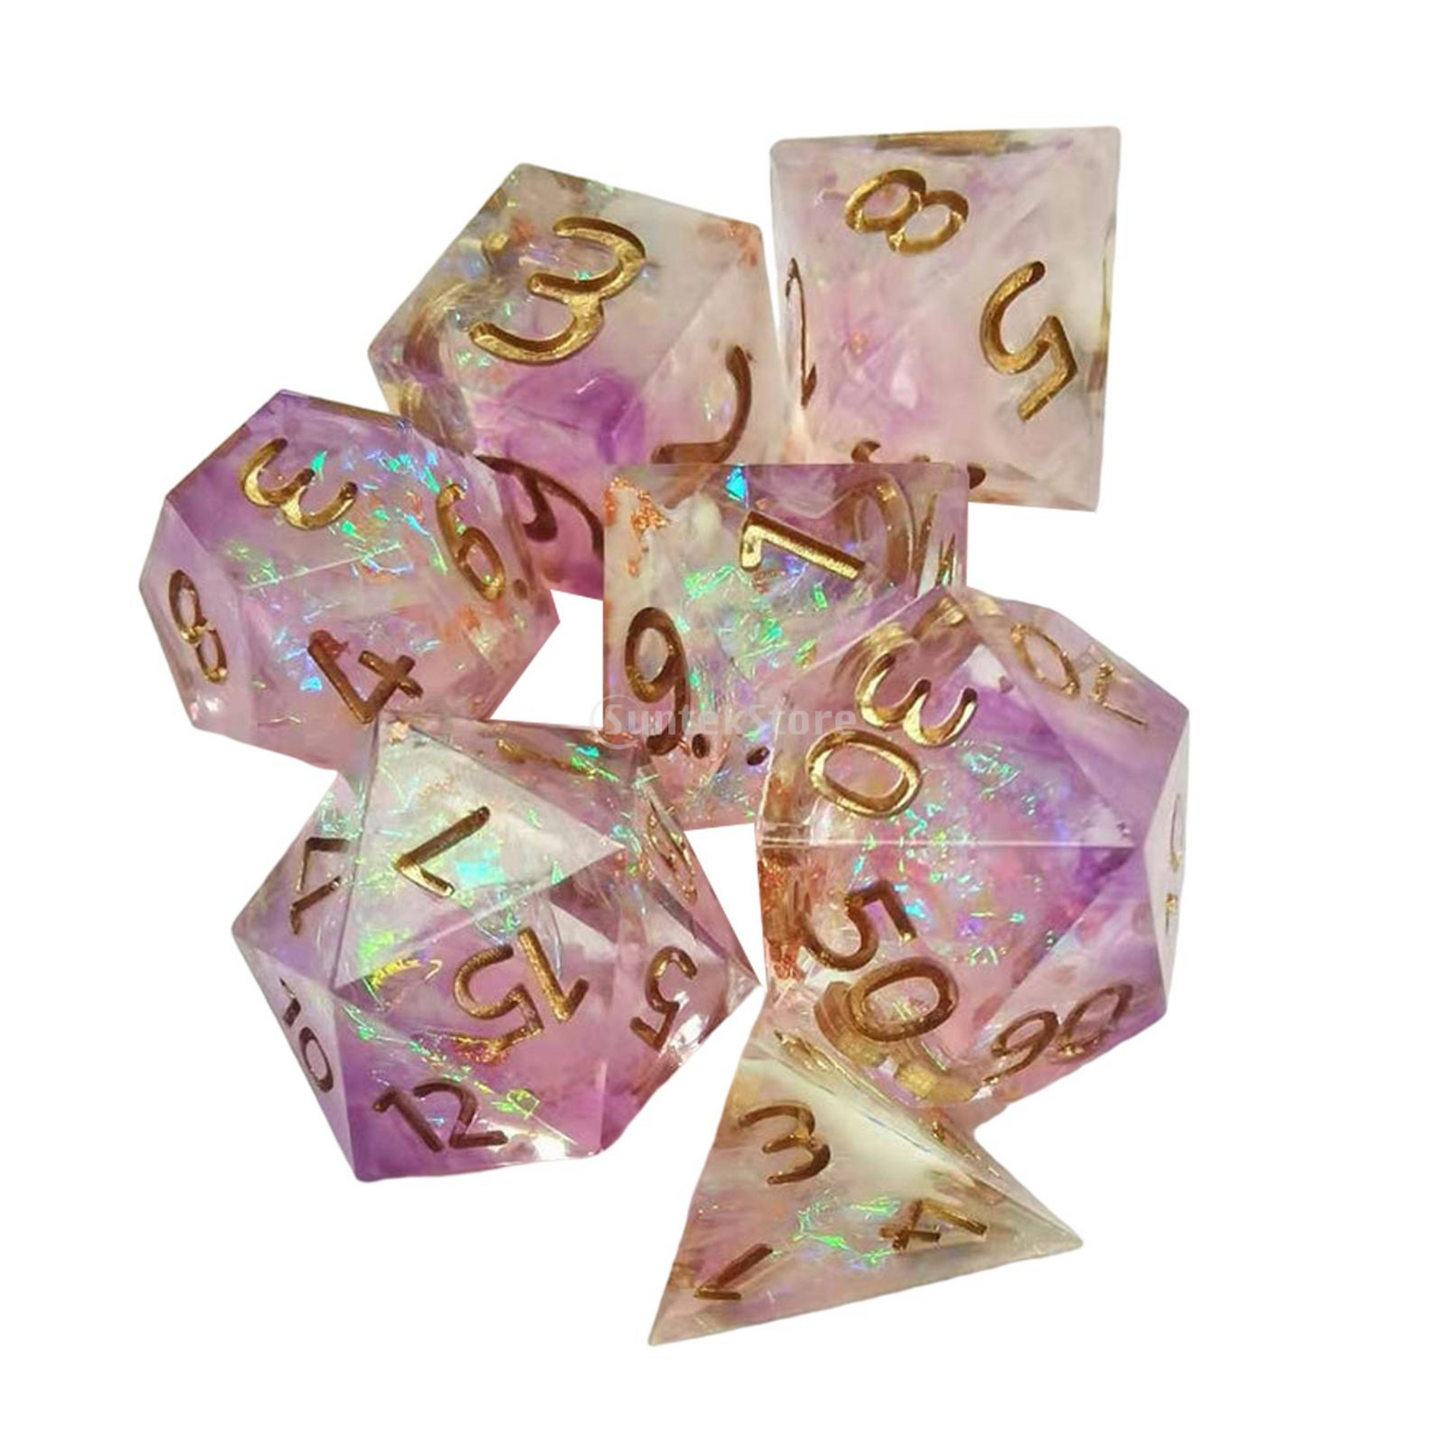 MagiDeal Blood Effect Sharp Resin Polyhedral Dice Set